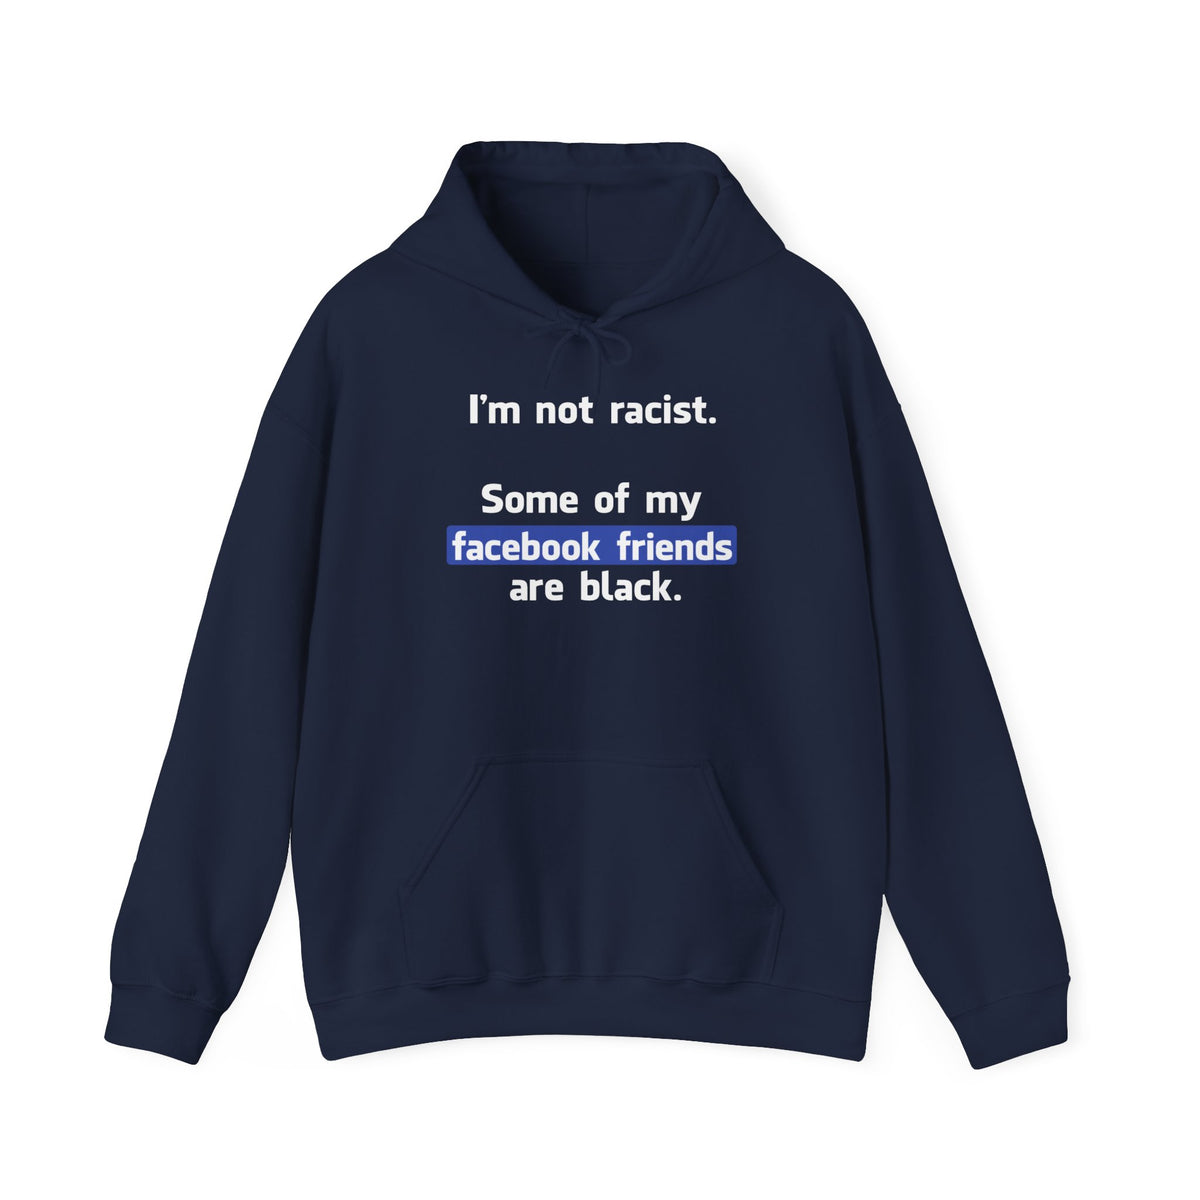 I'm Not Racist. Some Of My Facebook Friends Are Black. - Hoodie